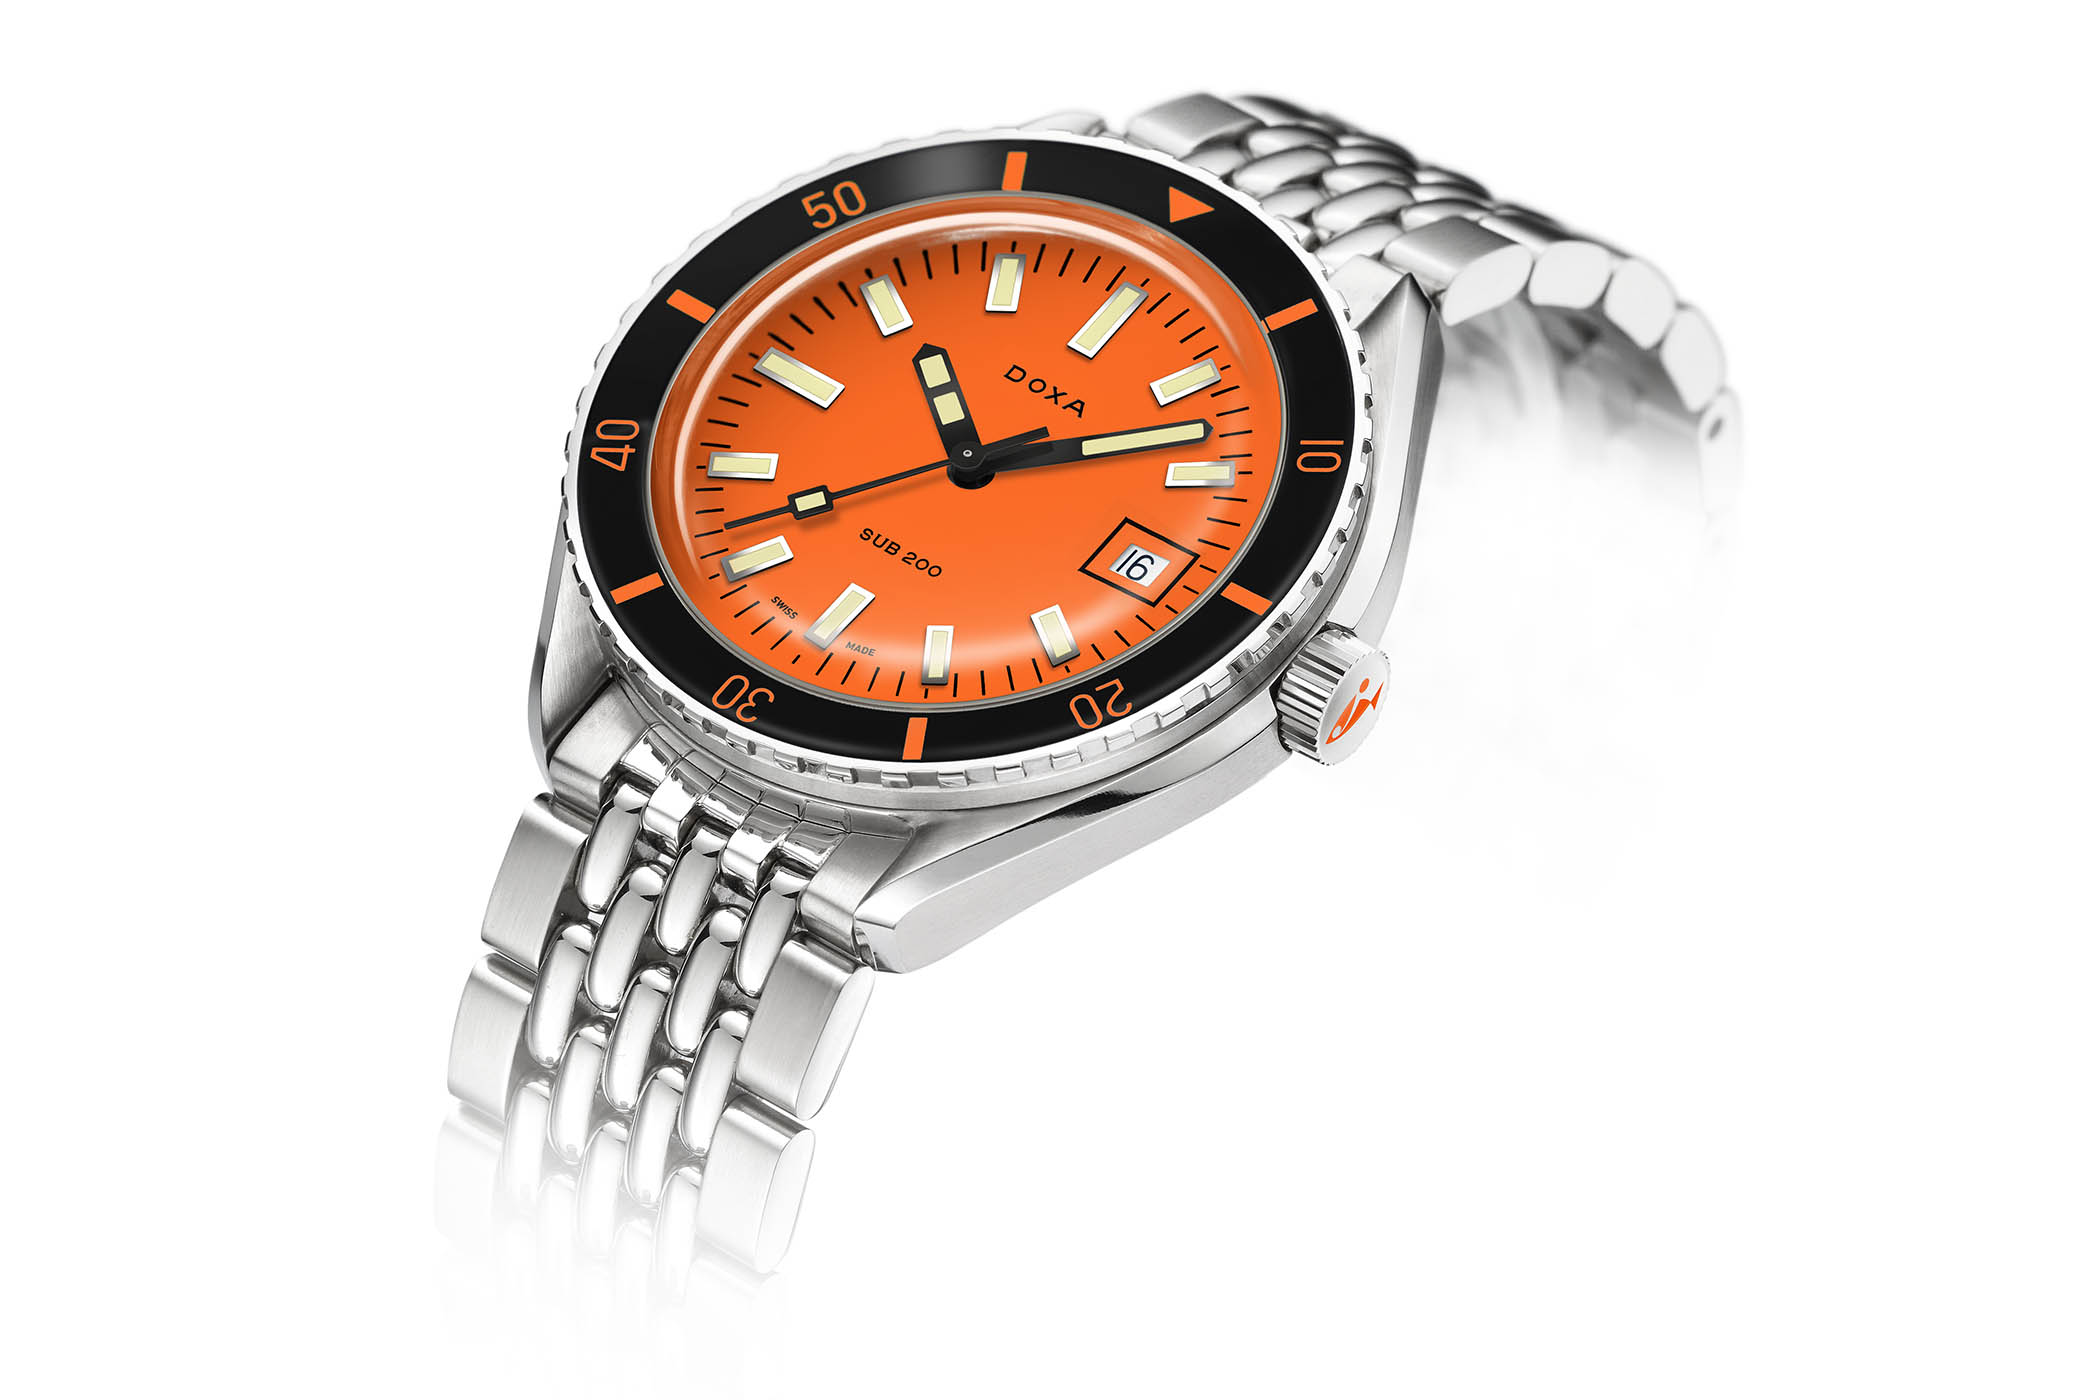 Doxa Sub 200 Collection 2019 - Value Proposition Dive Watch